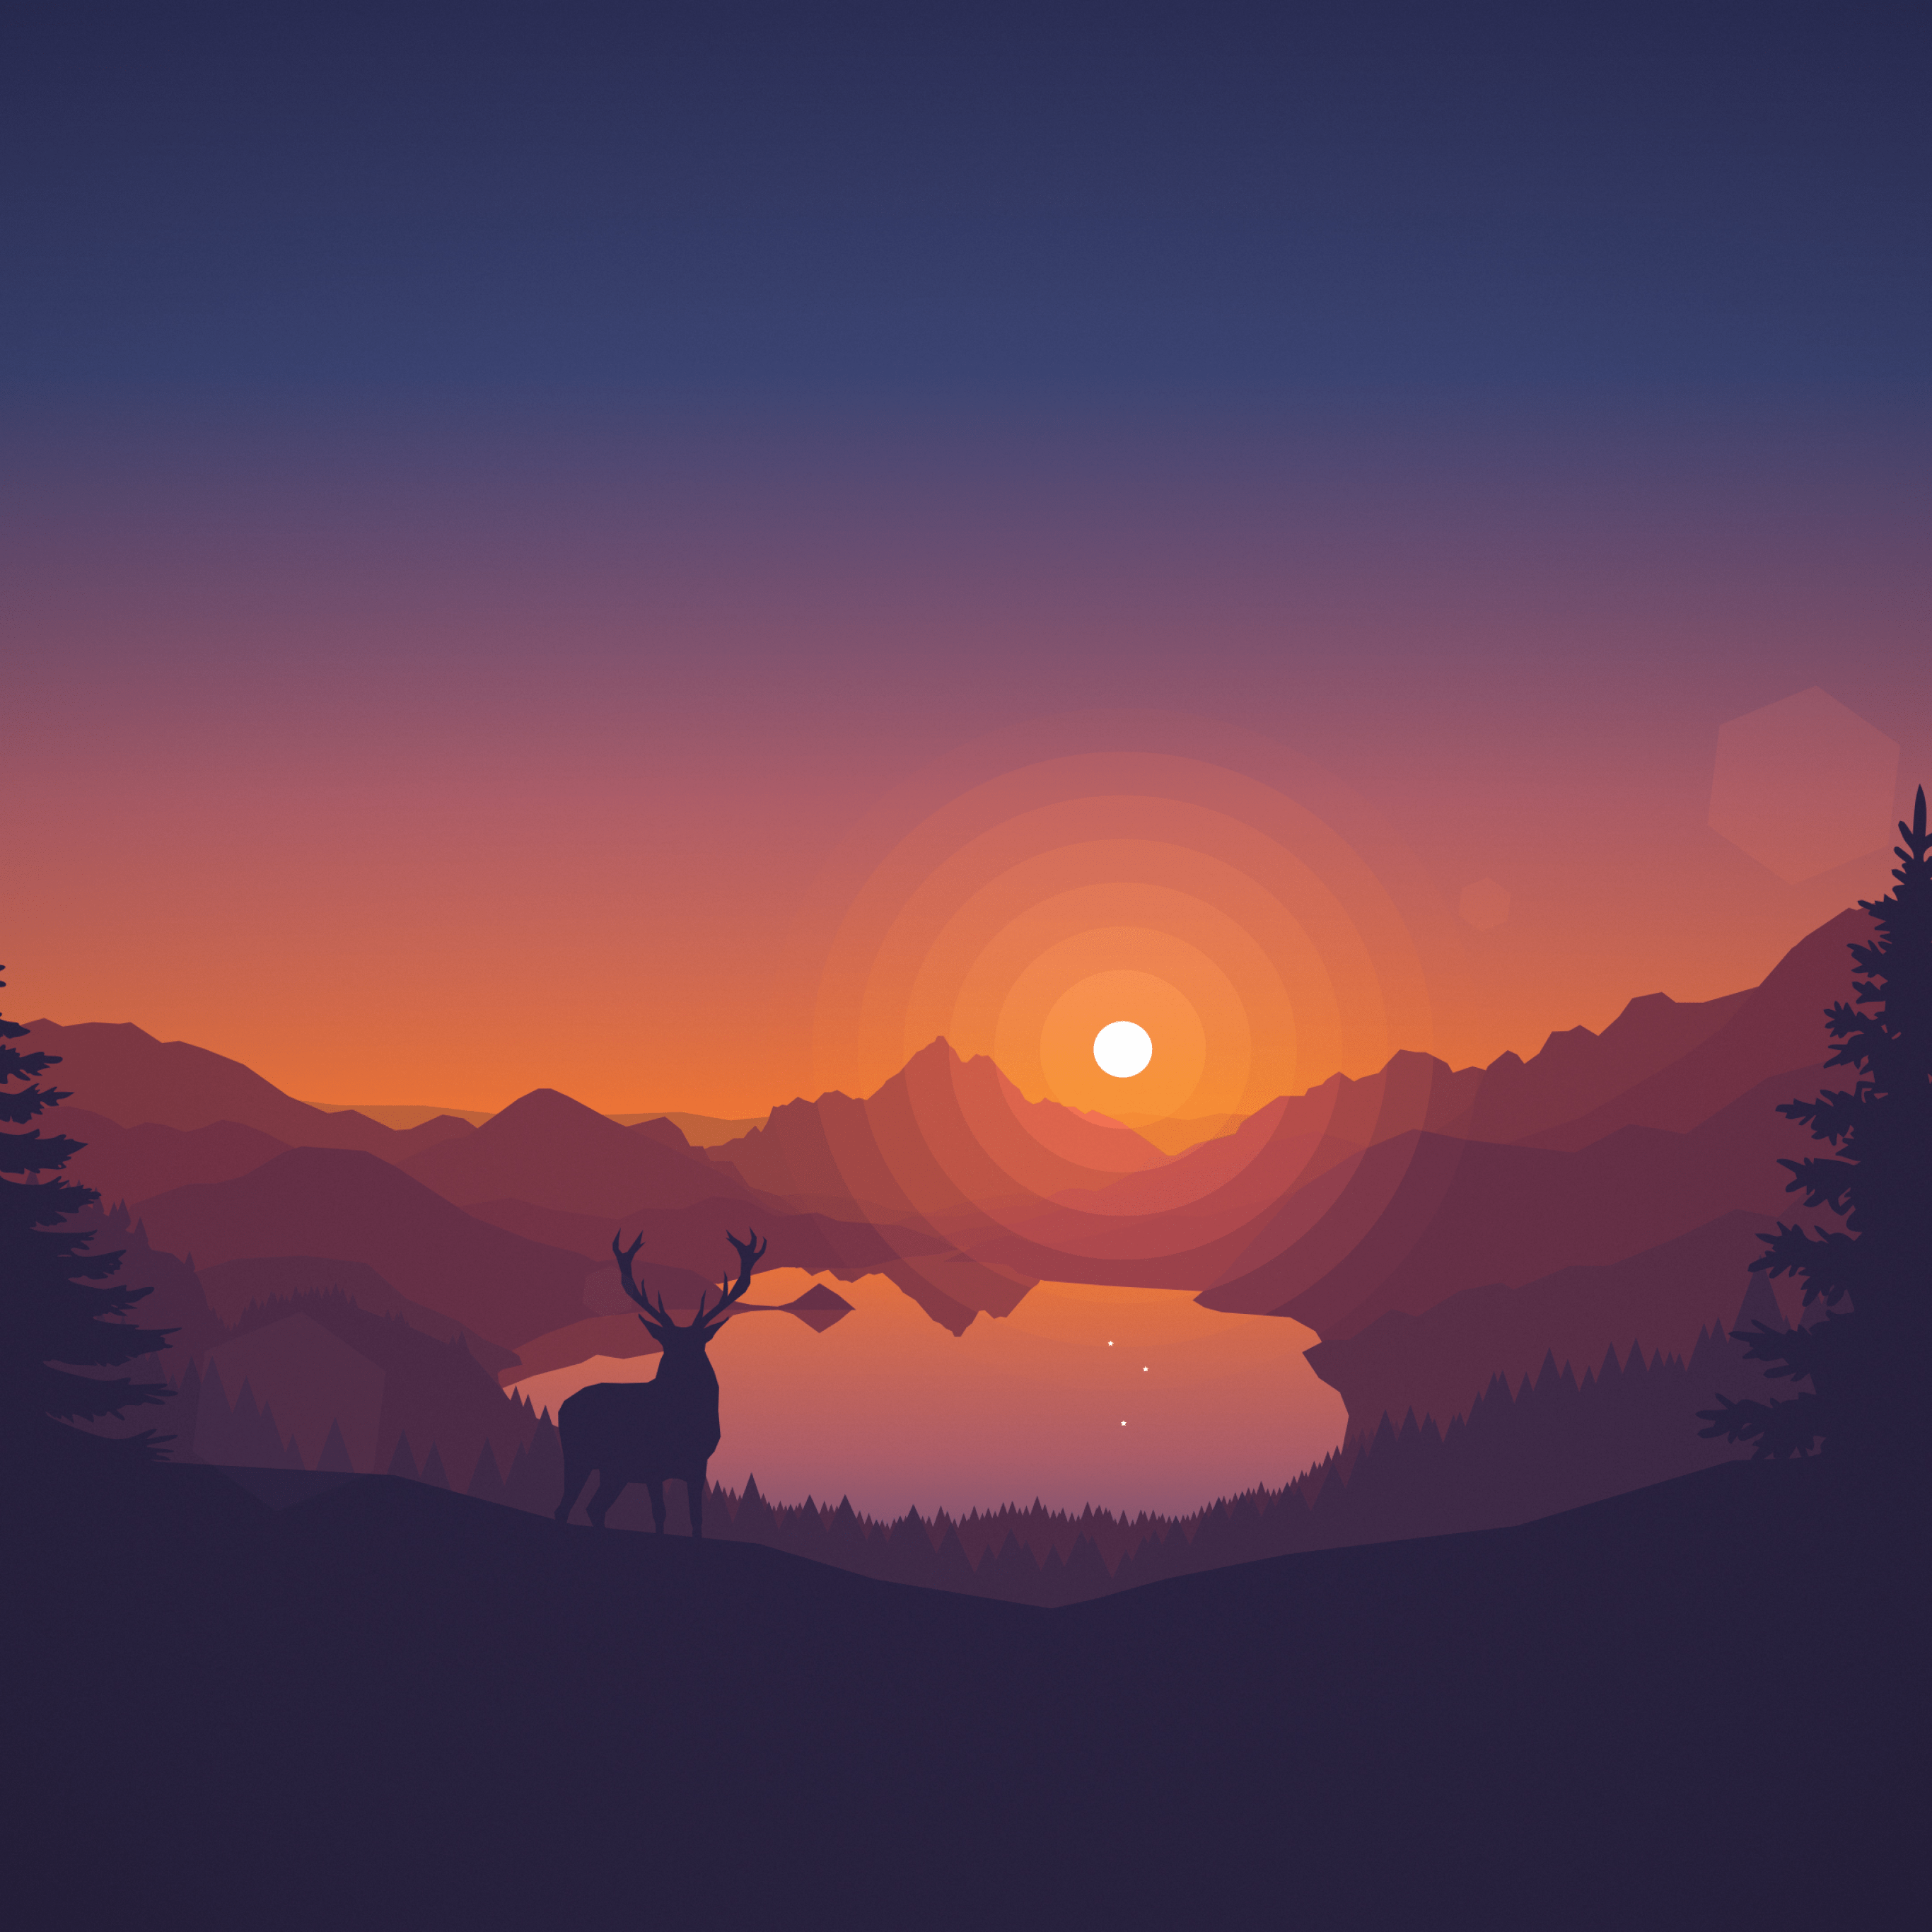 A deer standing in front of a lake with mountains in the background - Deer